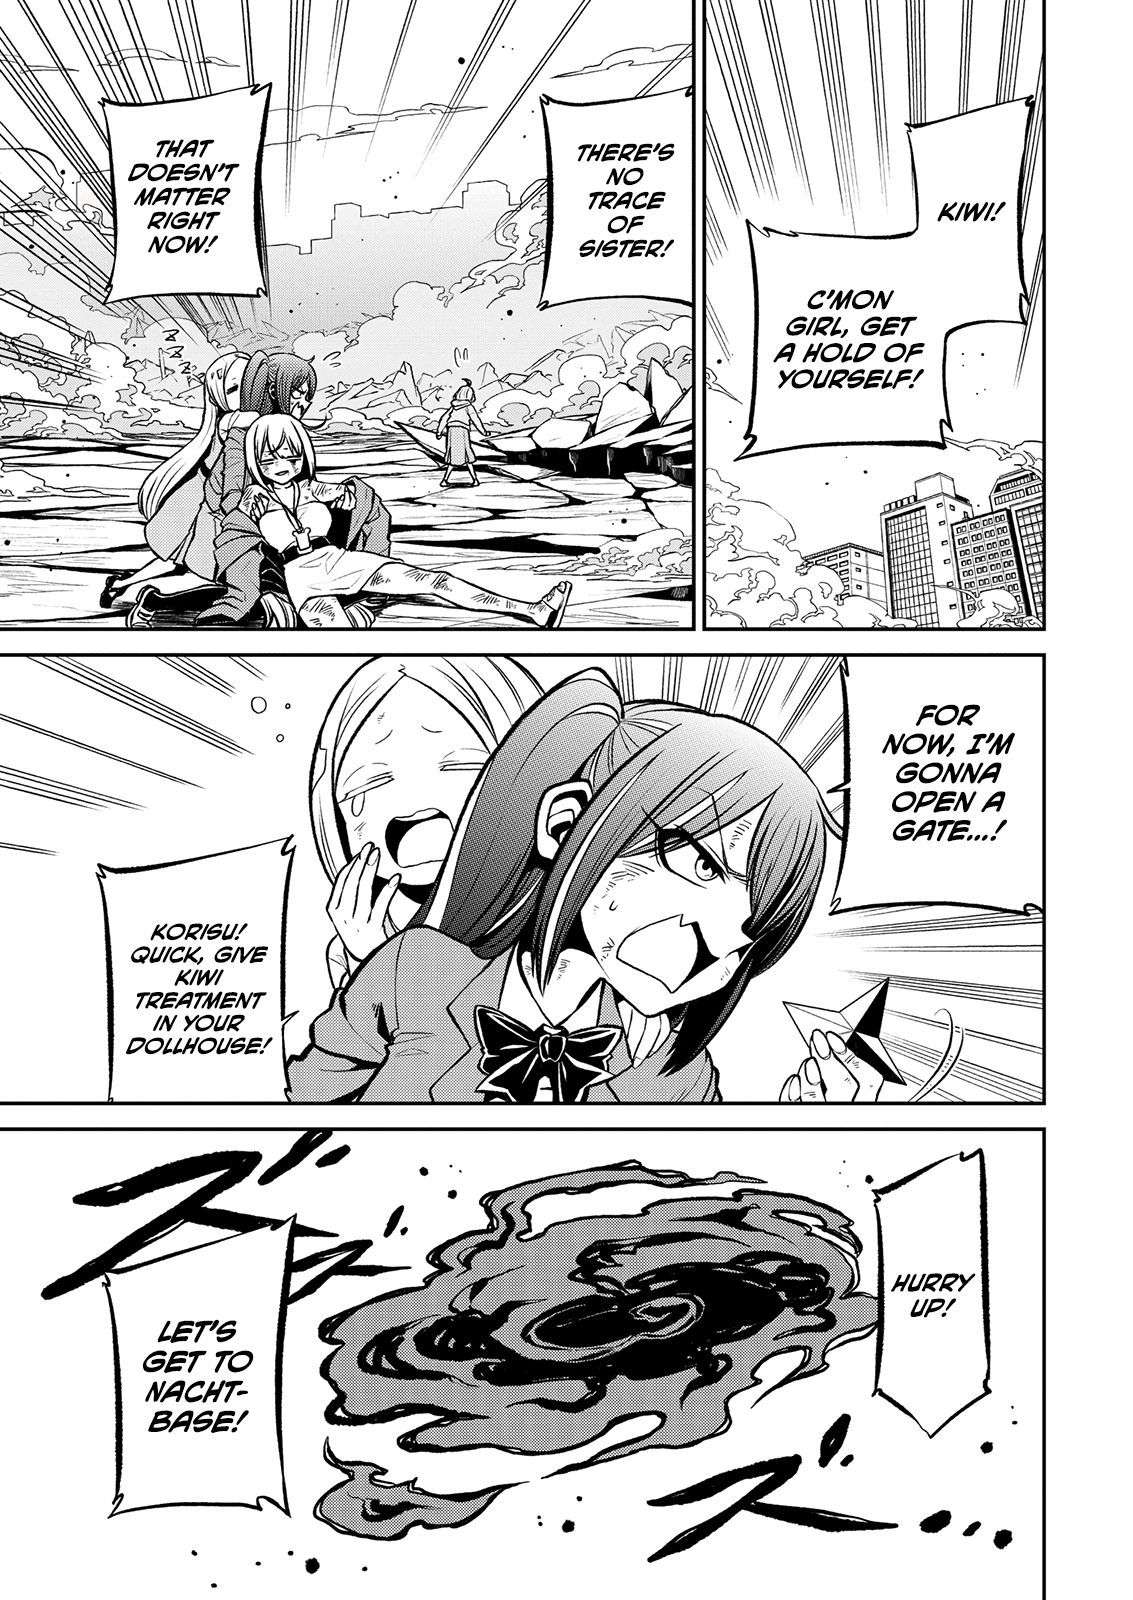 Gushing over Magical Girls - chapter 20 - #2